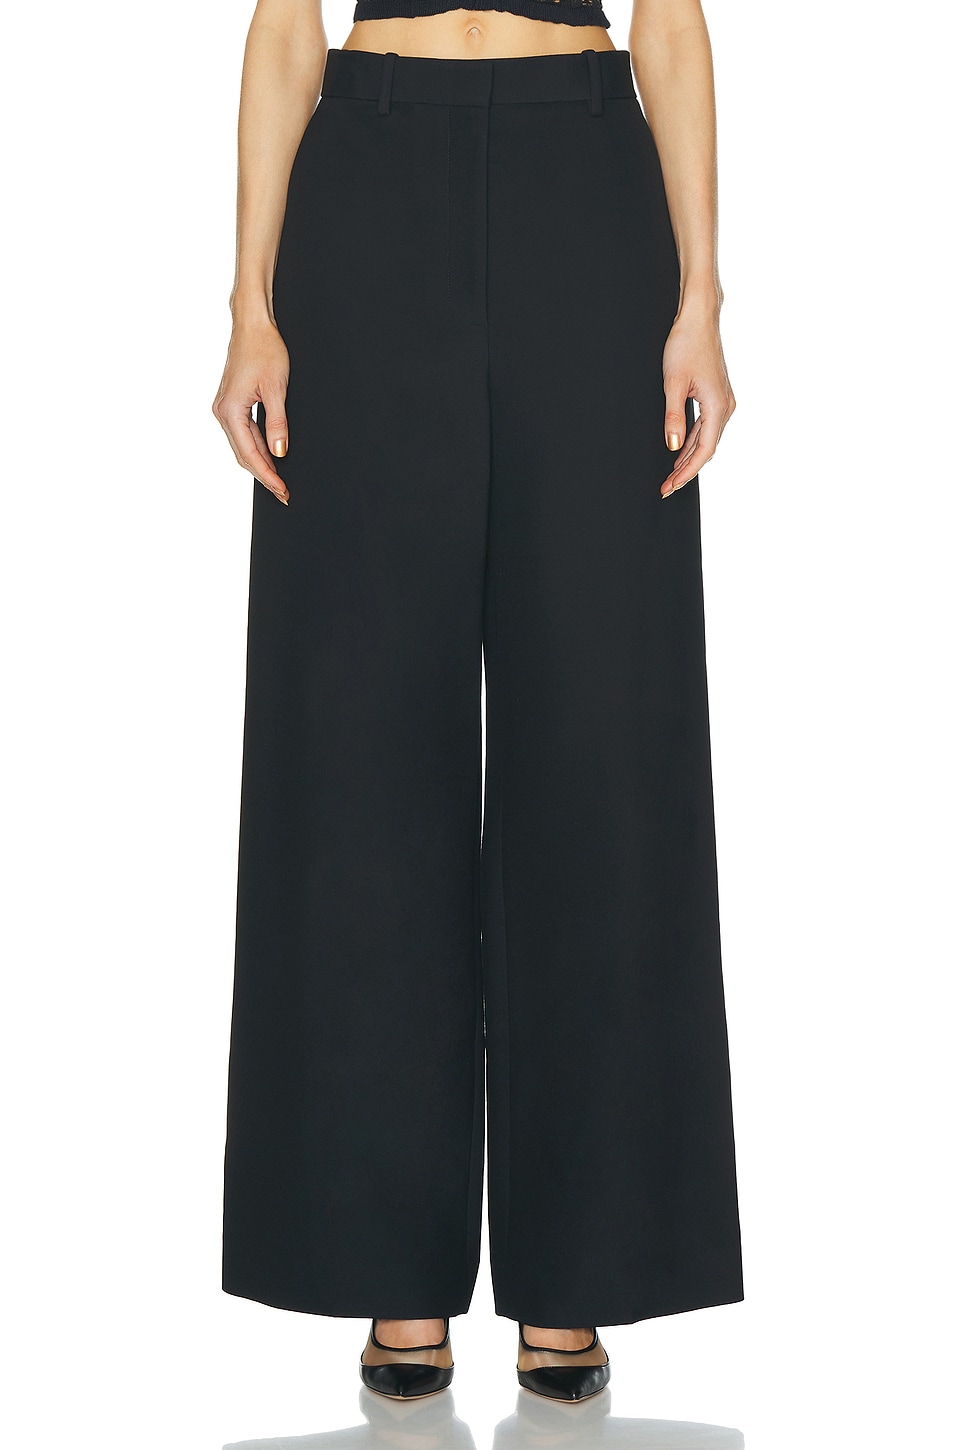 Bacall Pant in Black